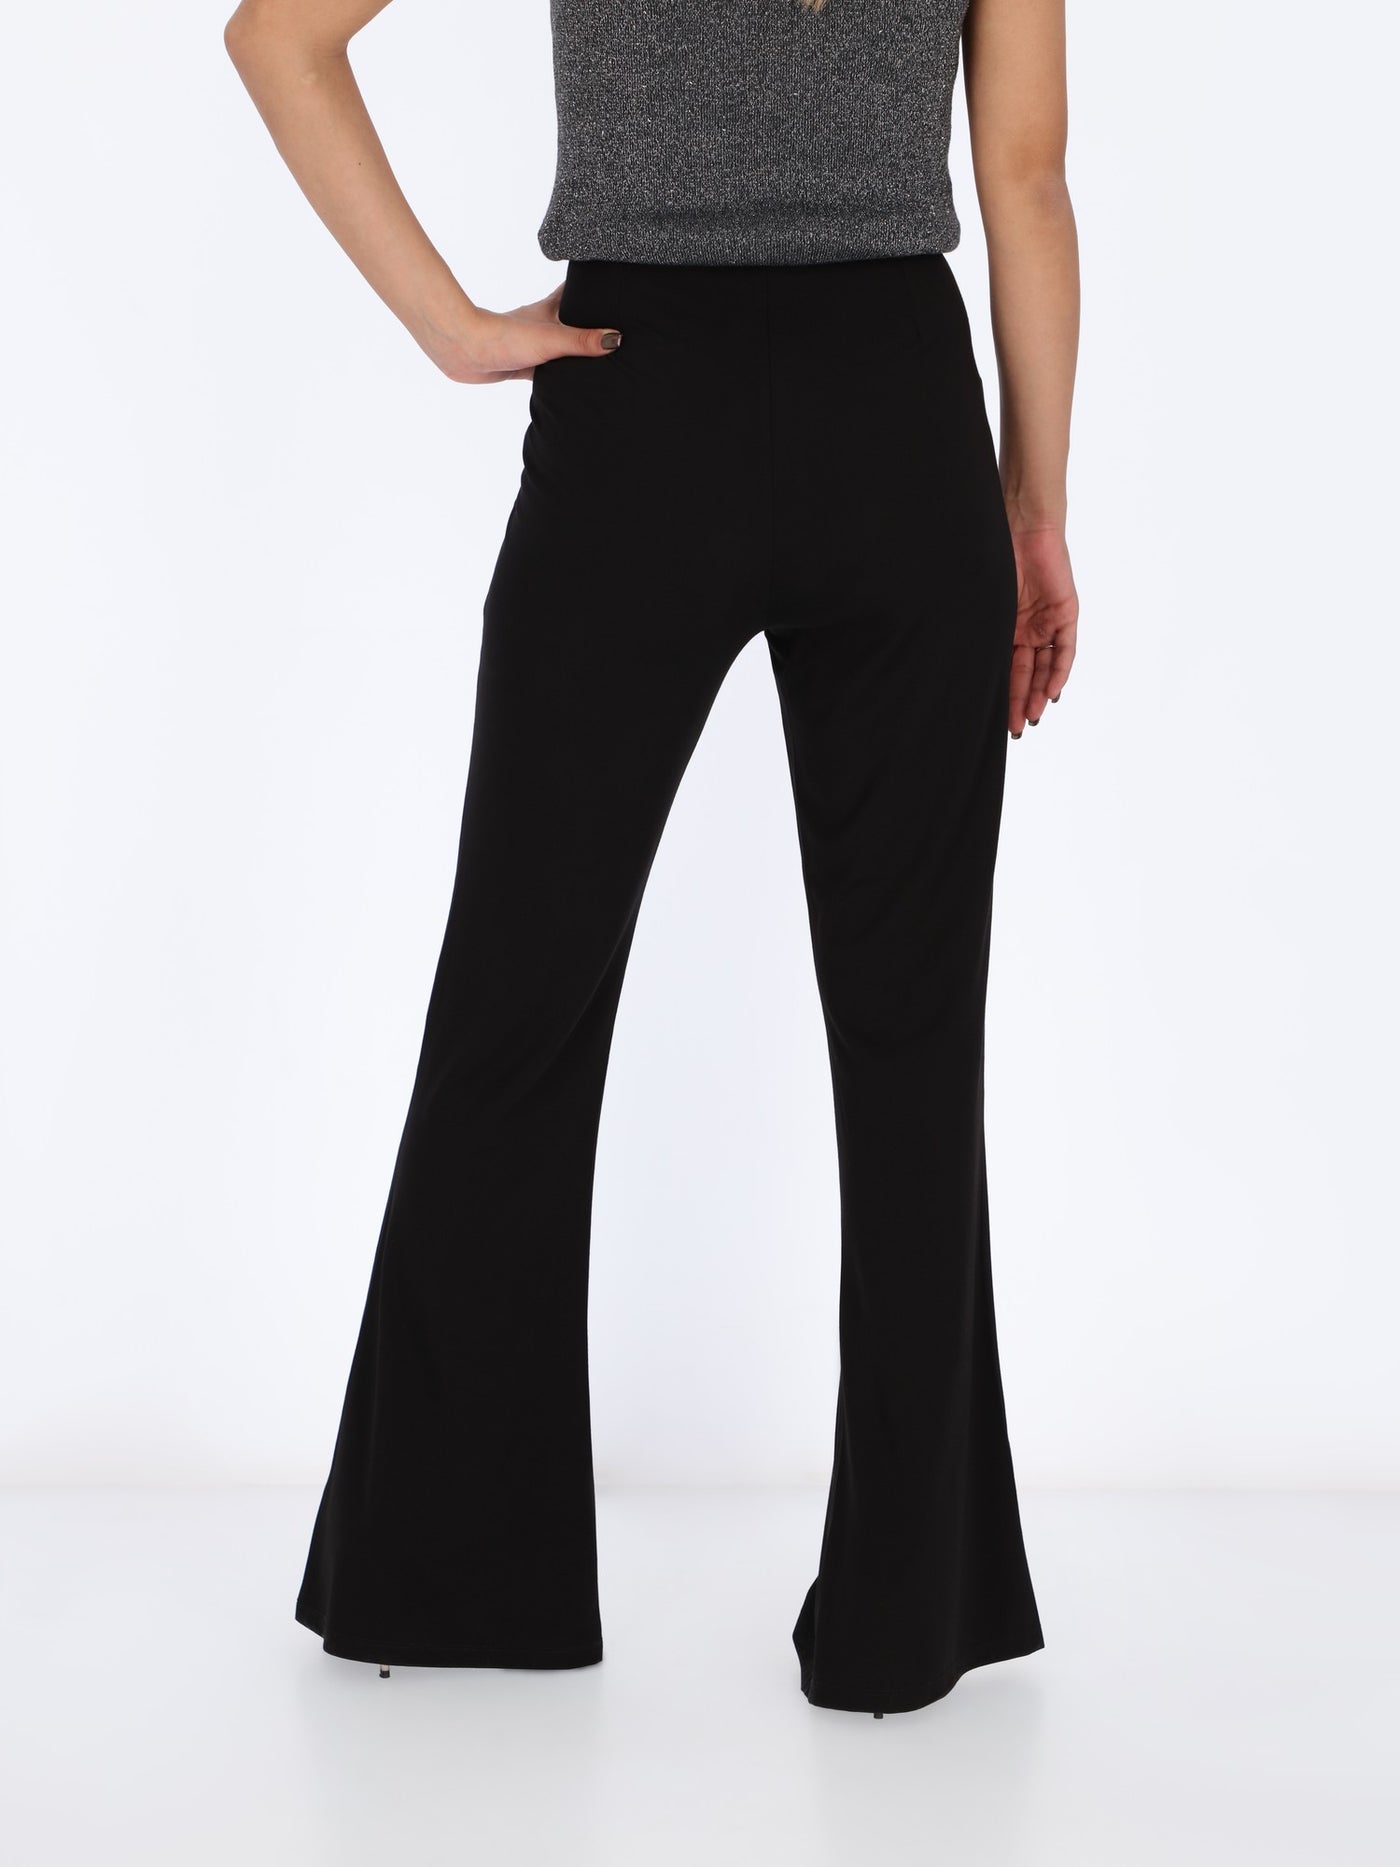 OR Women's Flared Pants